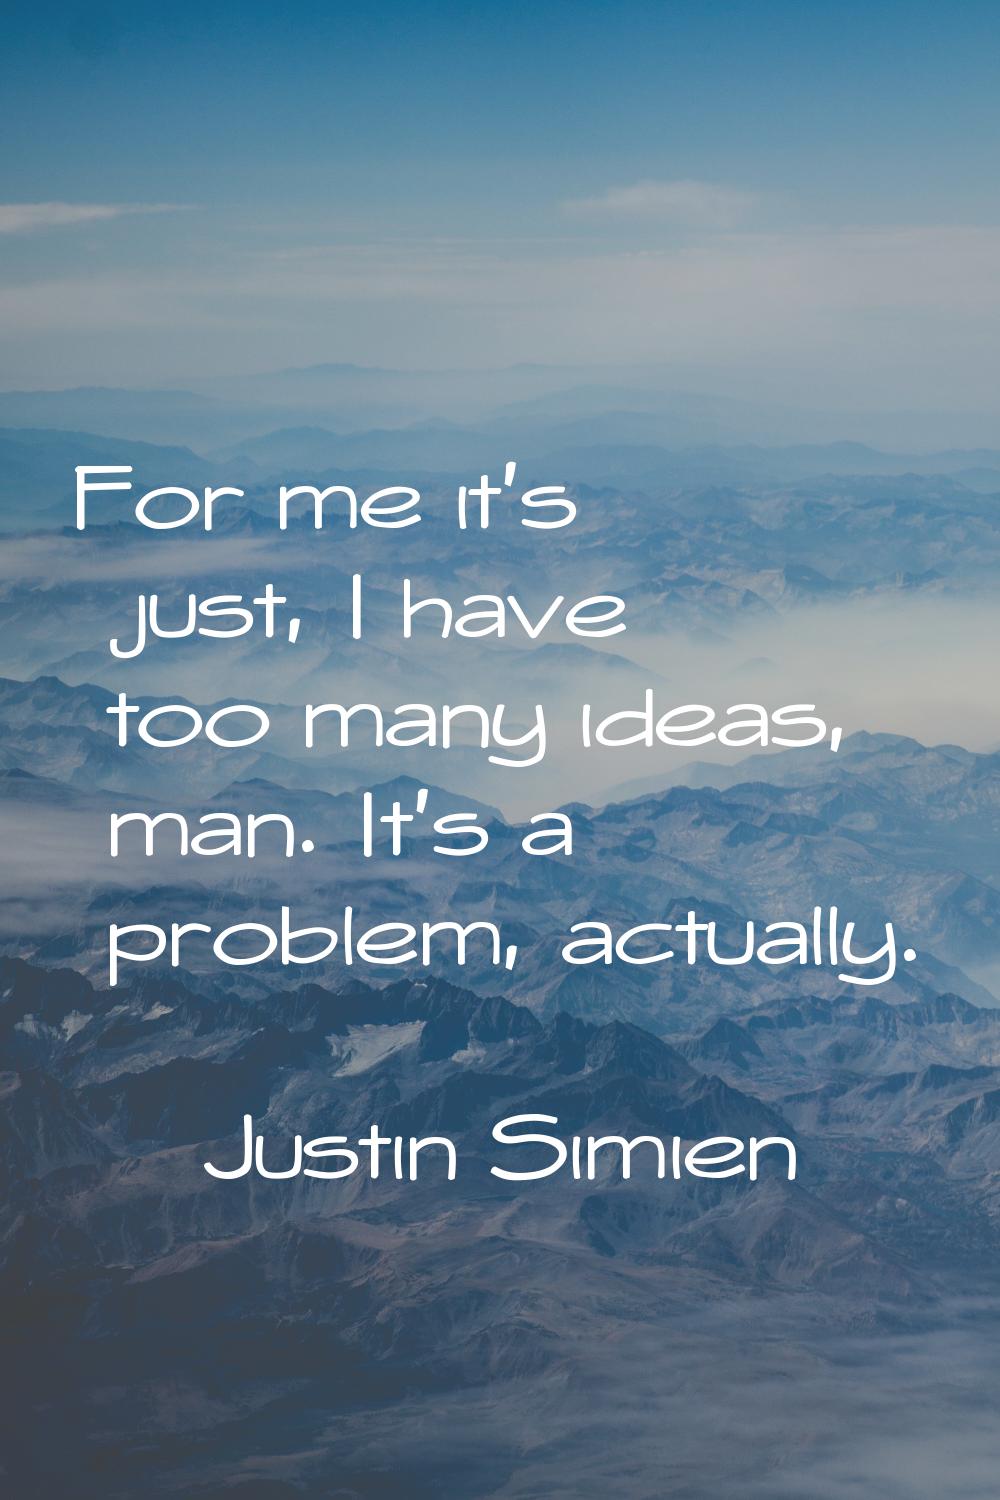 For me it's just, I have too many ideas, man. It's a problem, actually.